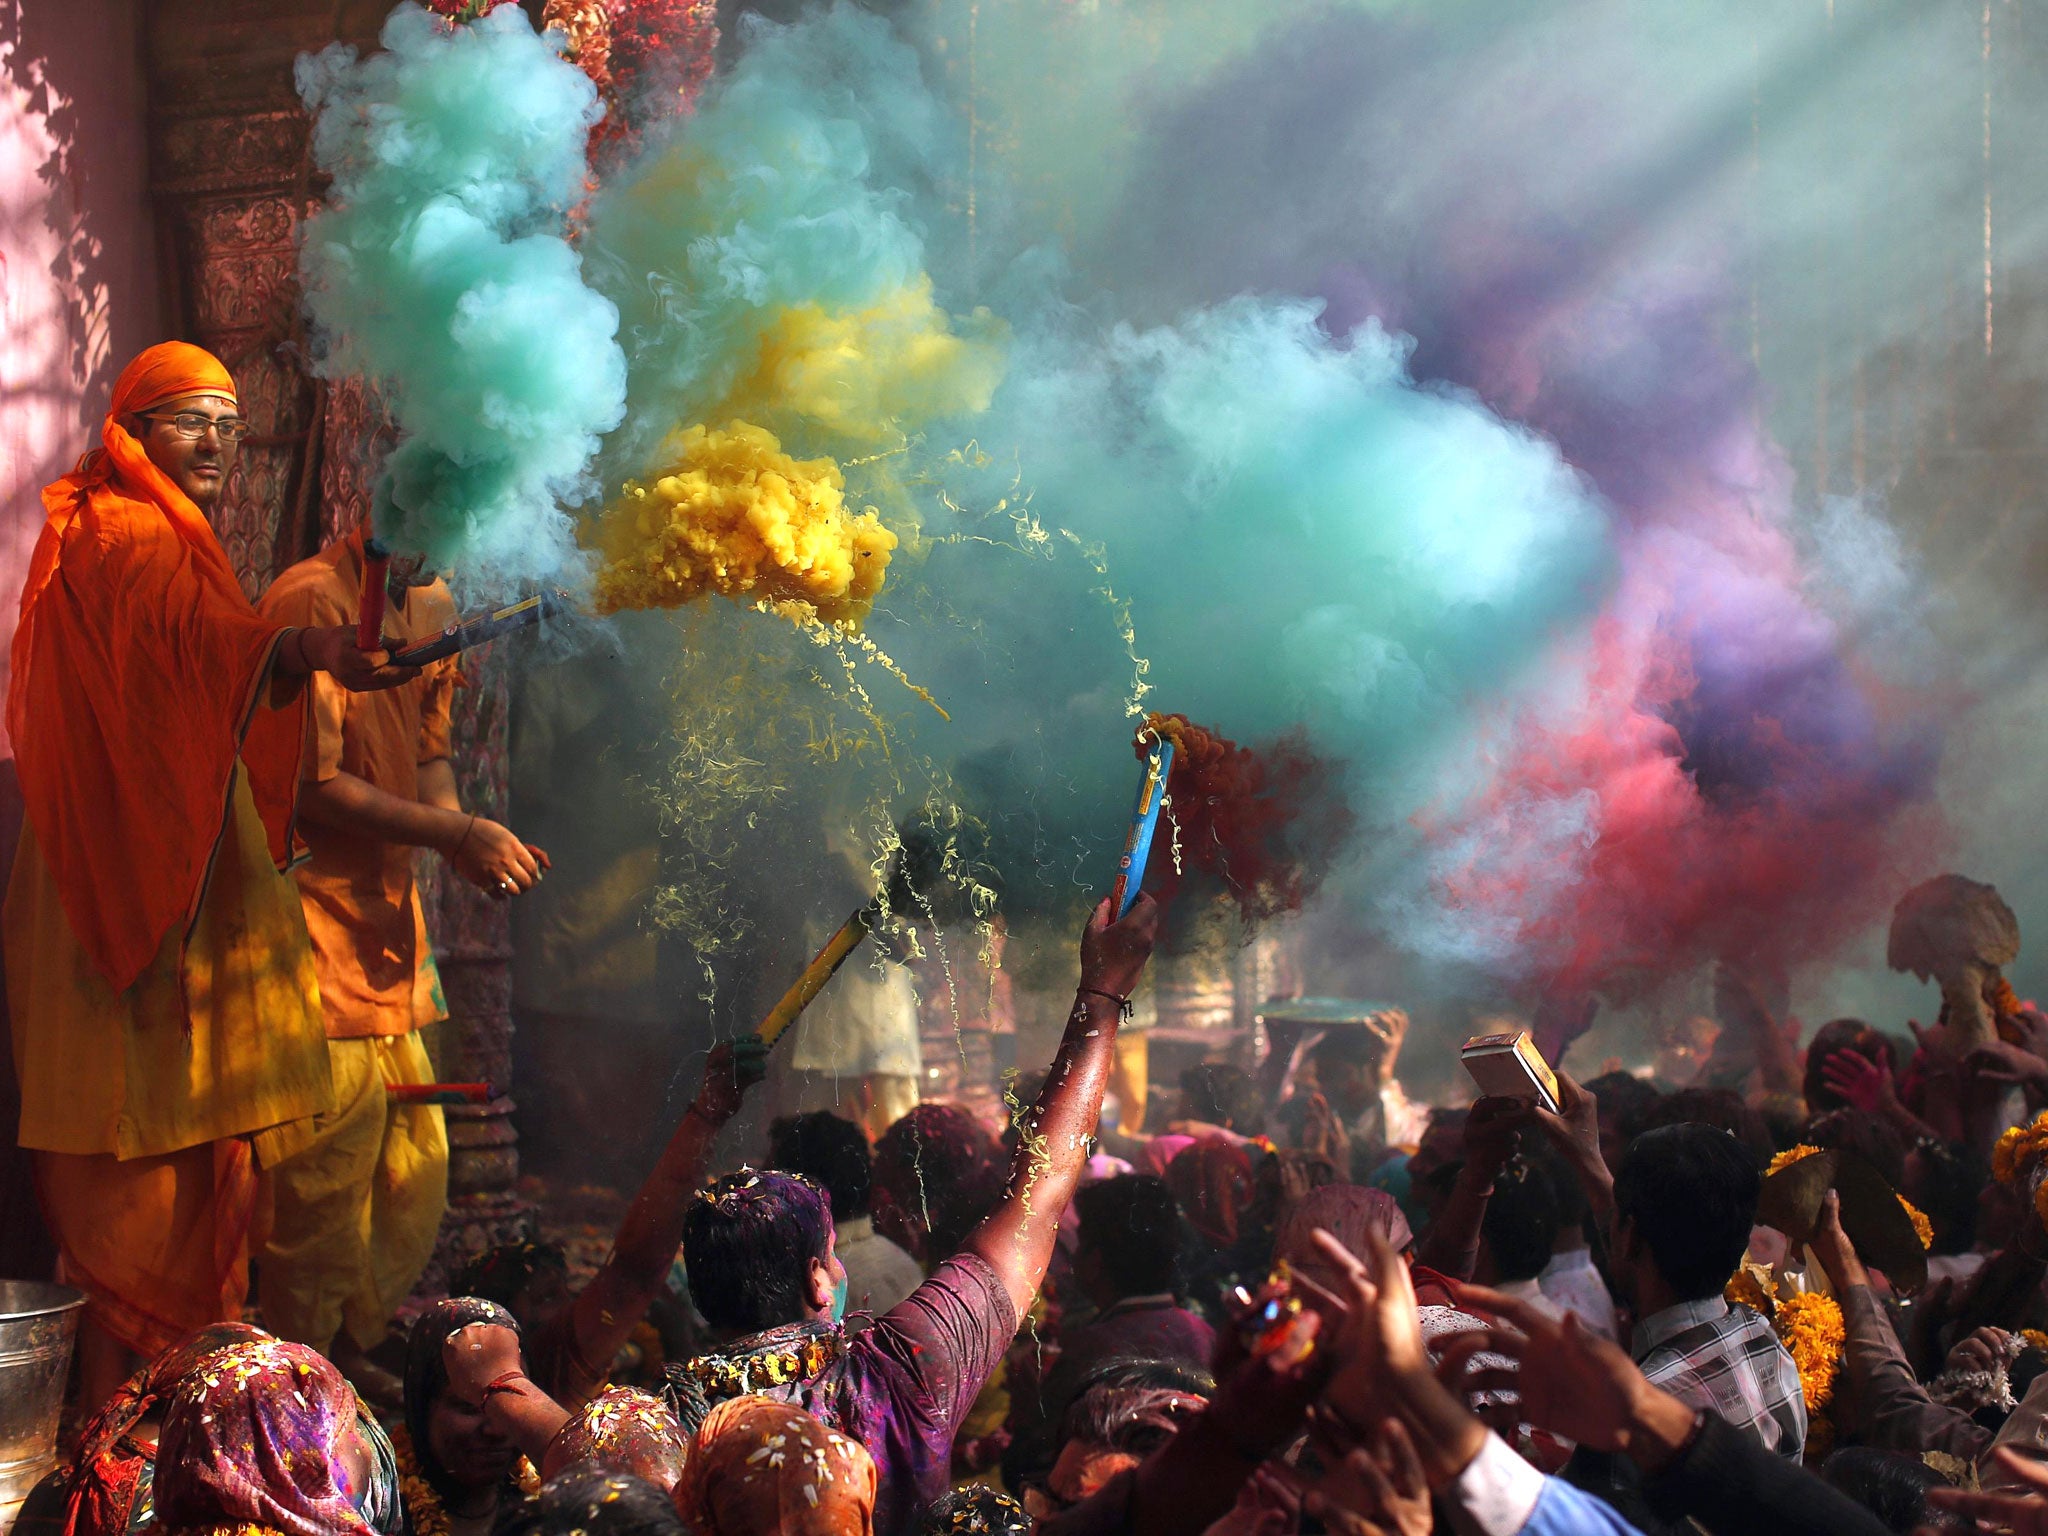 Colourful smoke rises as Hindu priests throws coloured powder at the devotees during Holi celebrations at Bankey Bihari temple in Vrindavan, in the northern Indian state of Uttar Pradesh